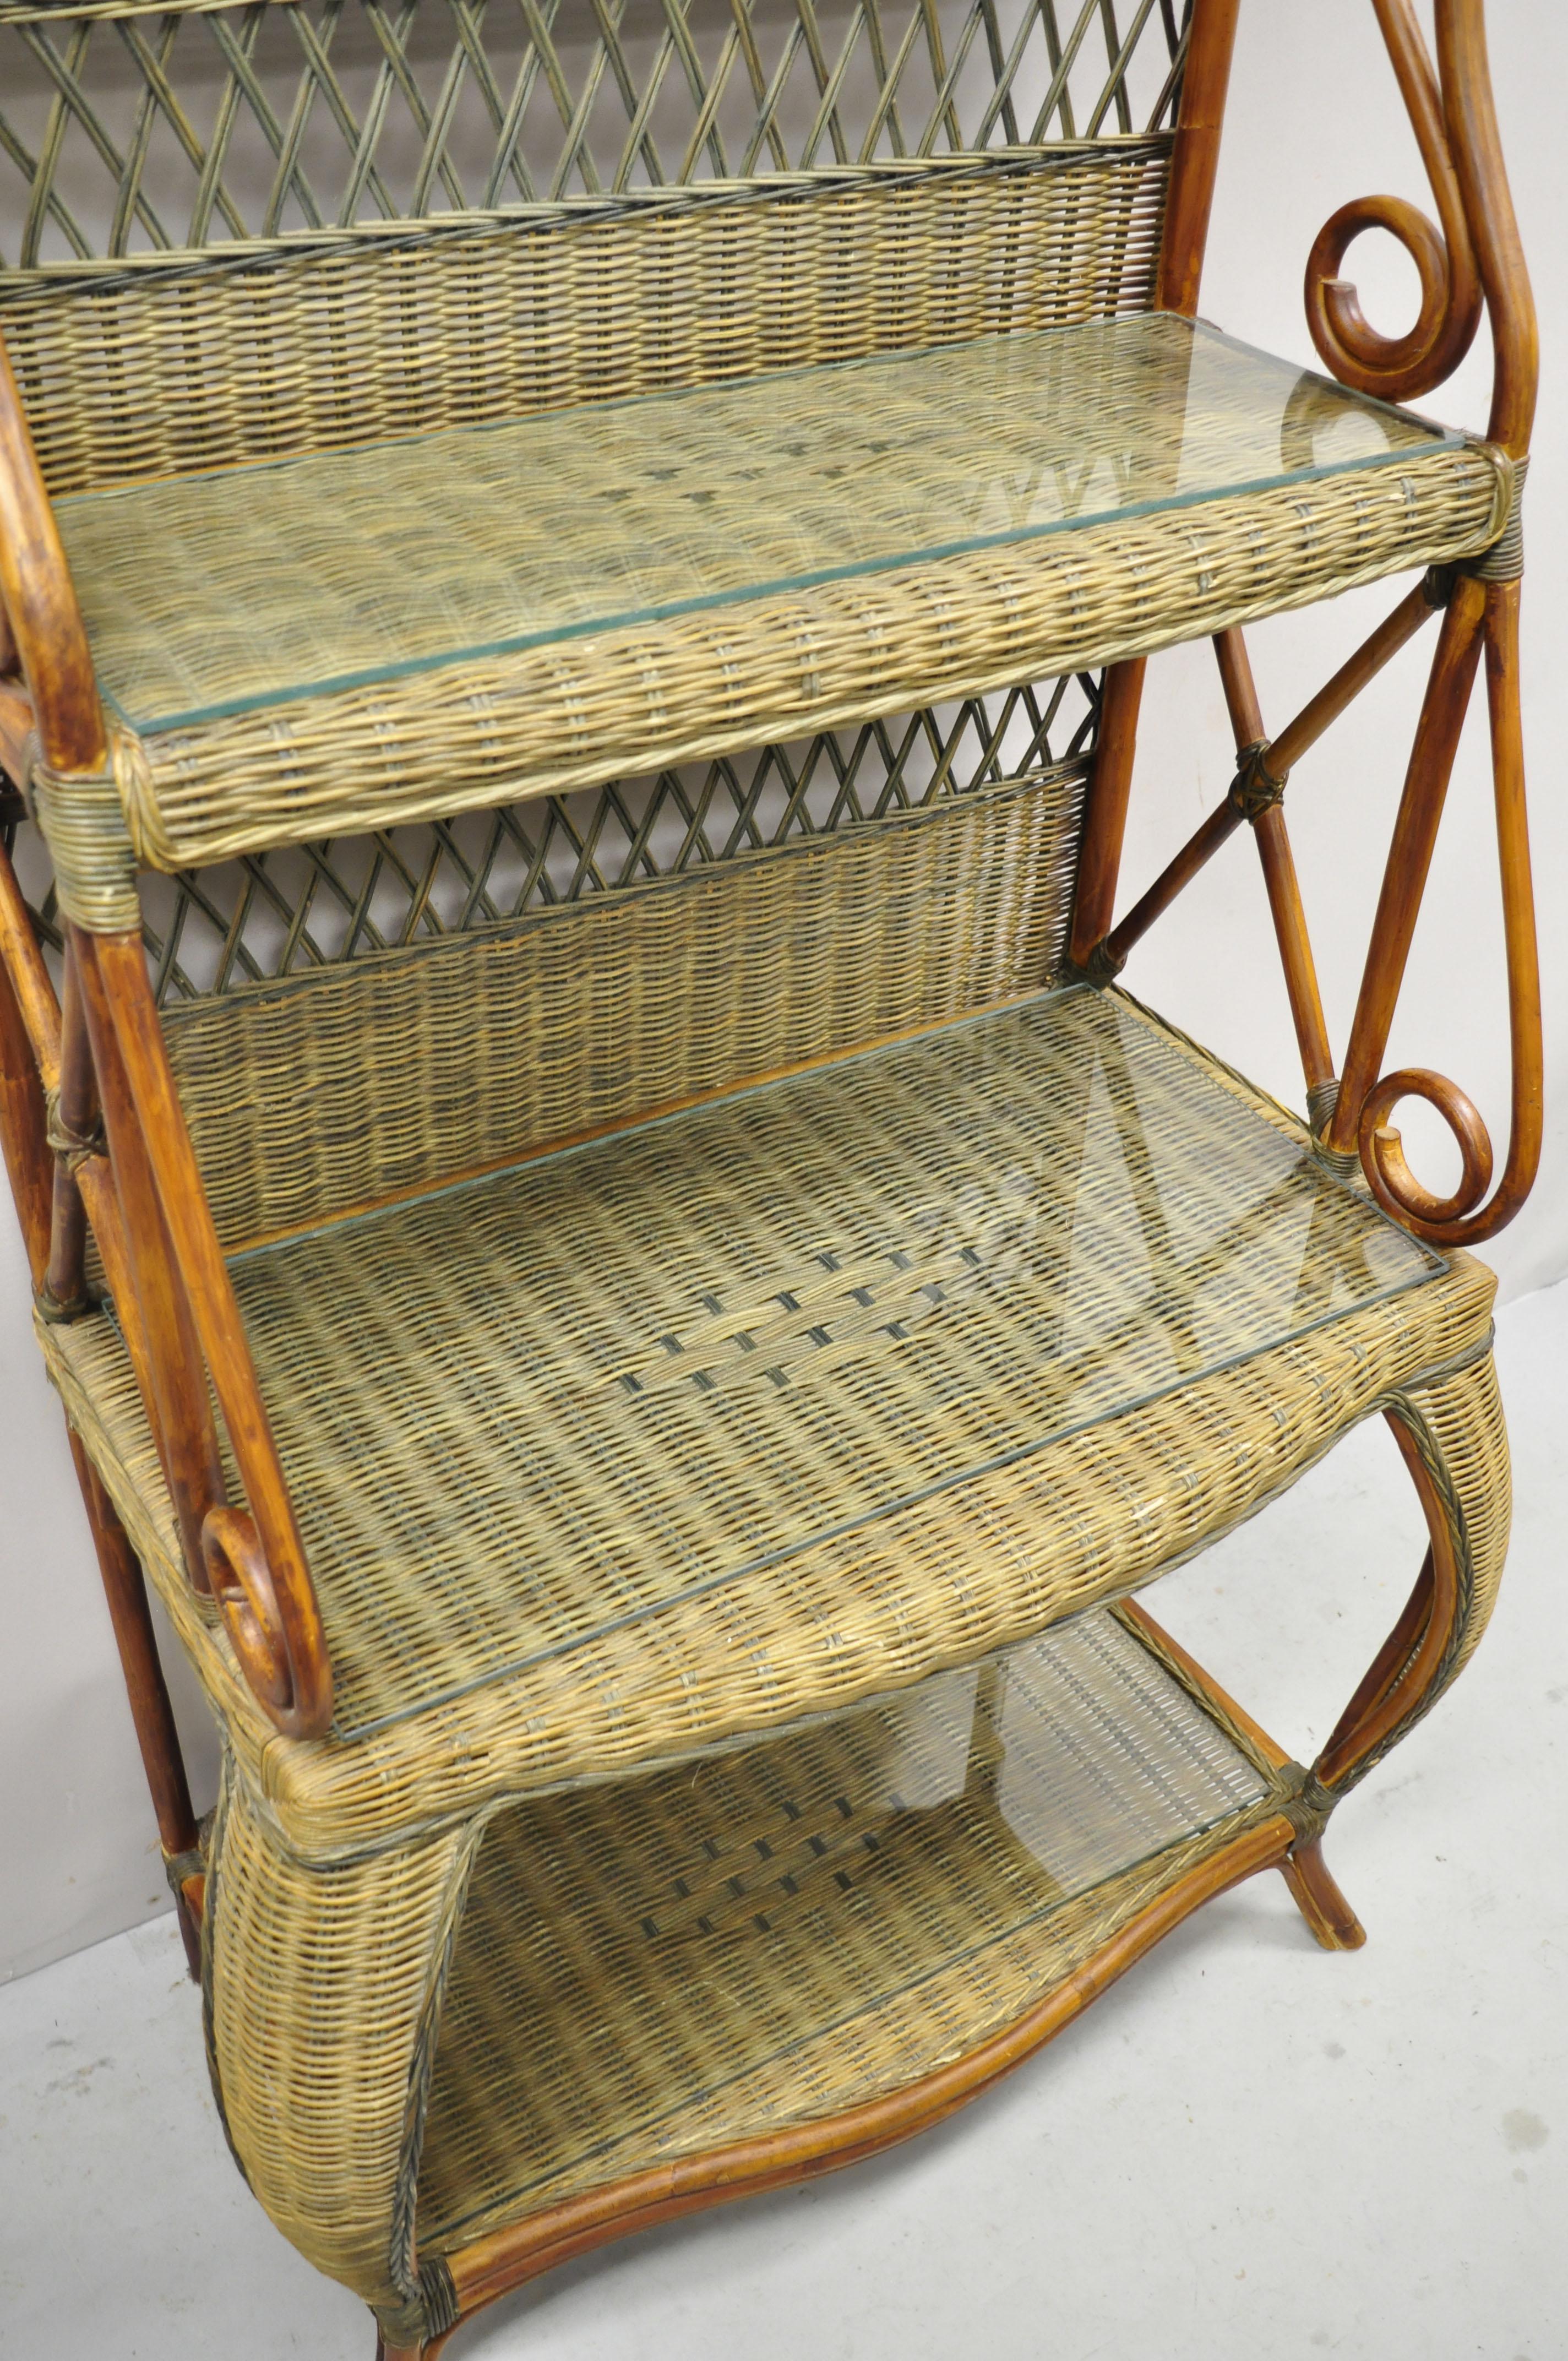 French Country 3 Tier Wicker Rattan Wrapped Frame Kitchen Bakers Rack Stand 1